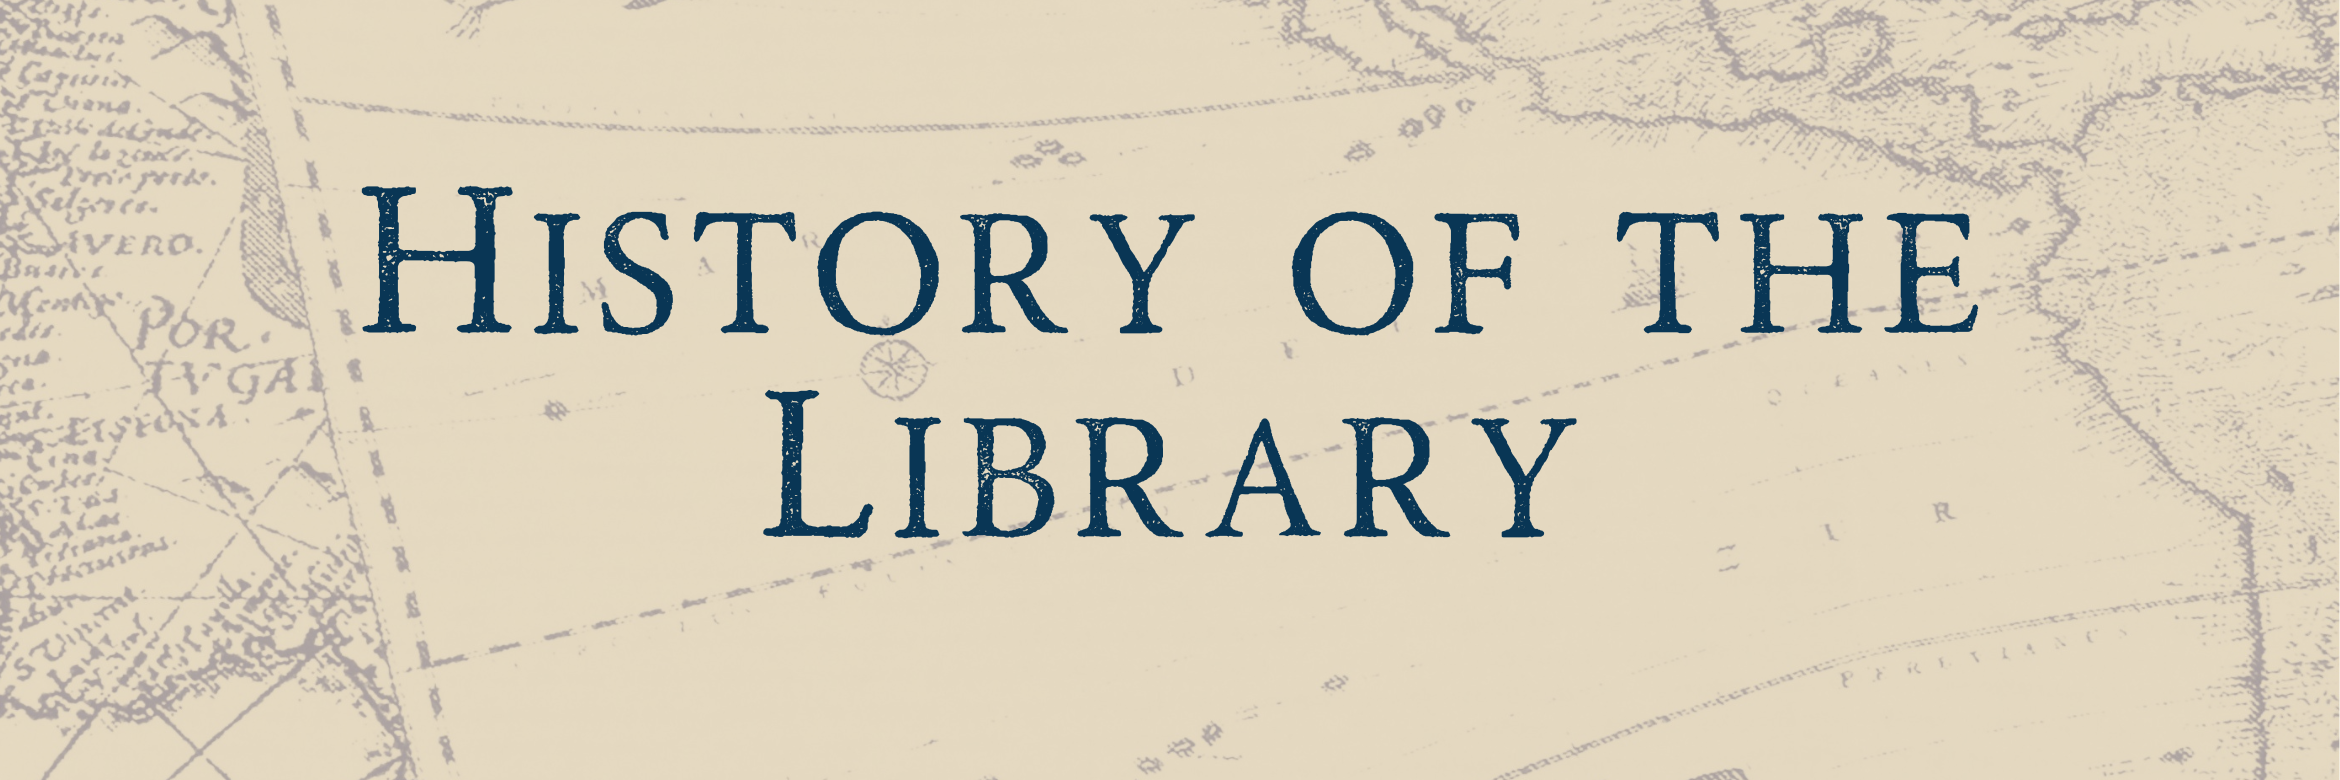 history of the library